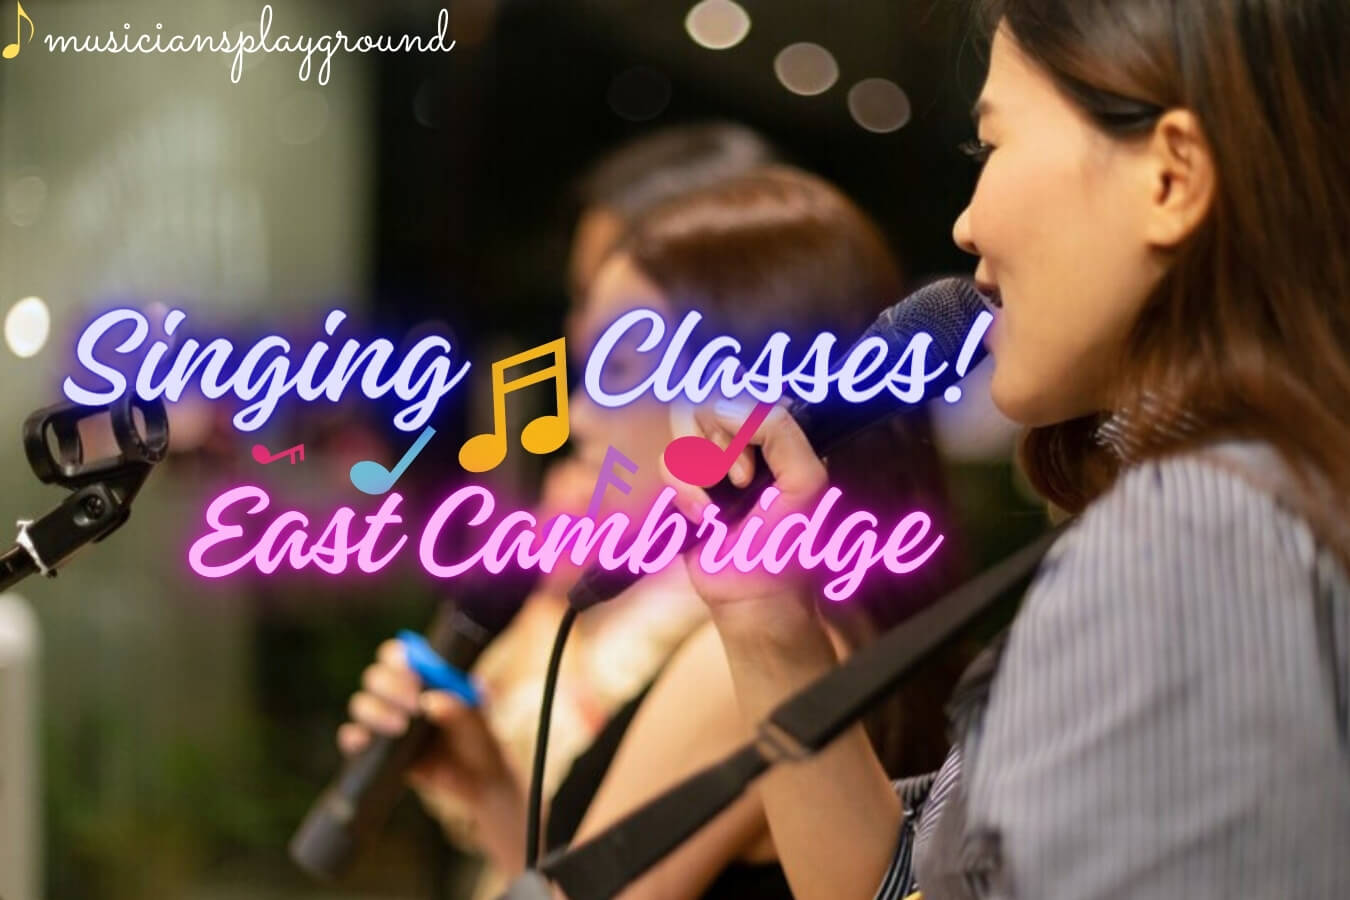 Welcome to Musicians Playground: Professional Singing Classes in East Cambridge, Massachusetts